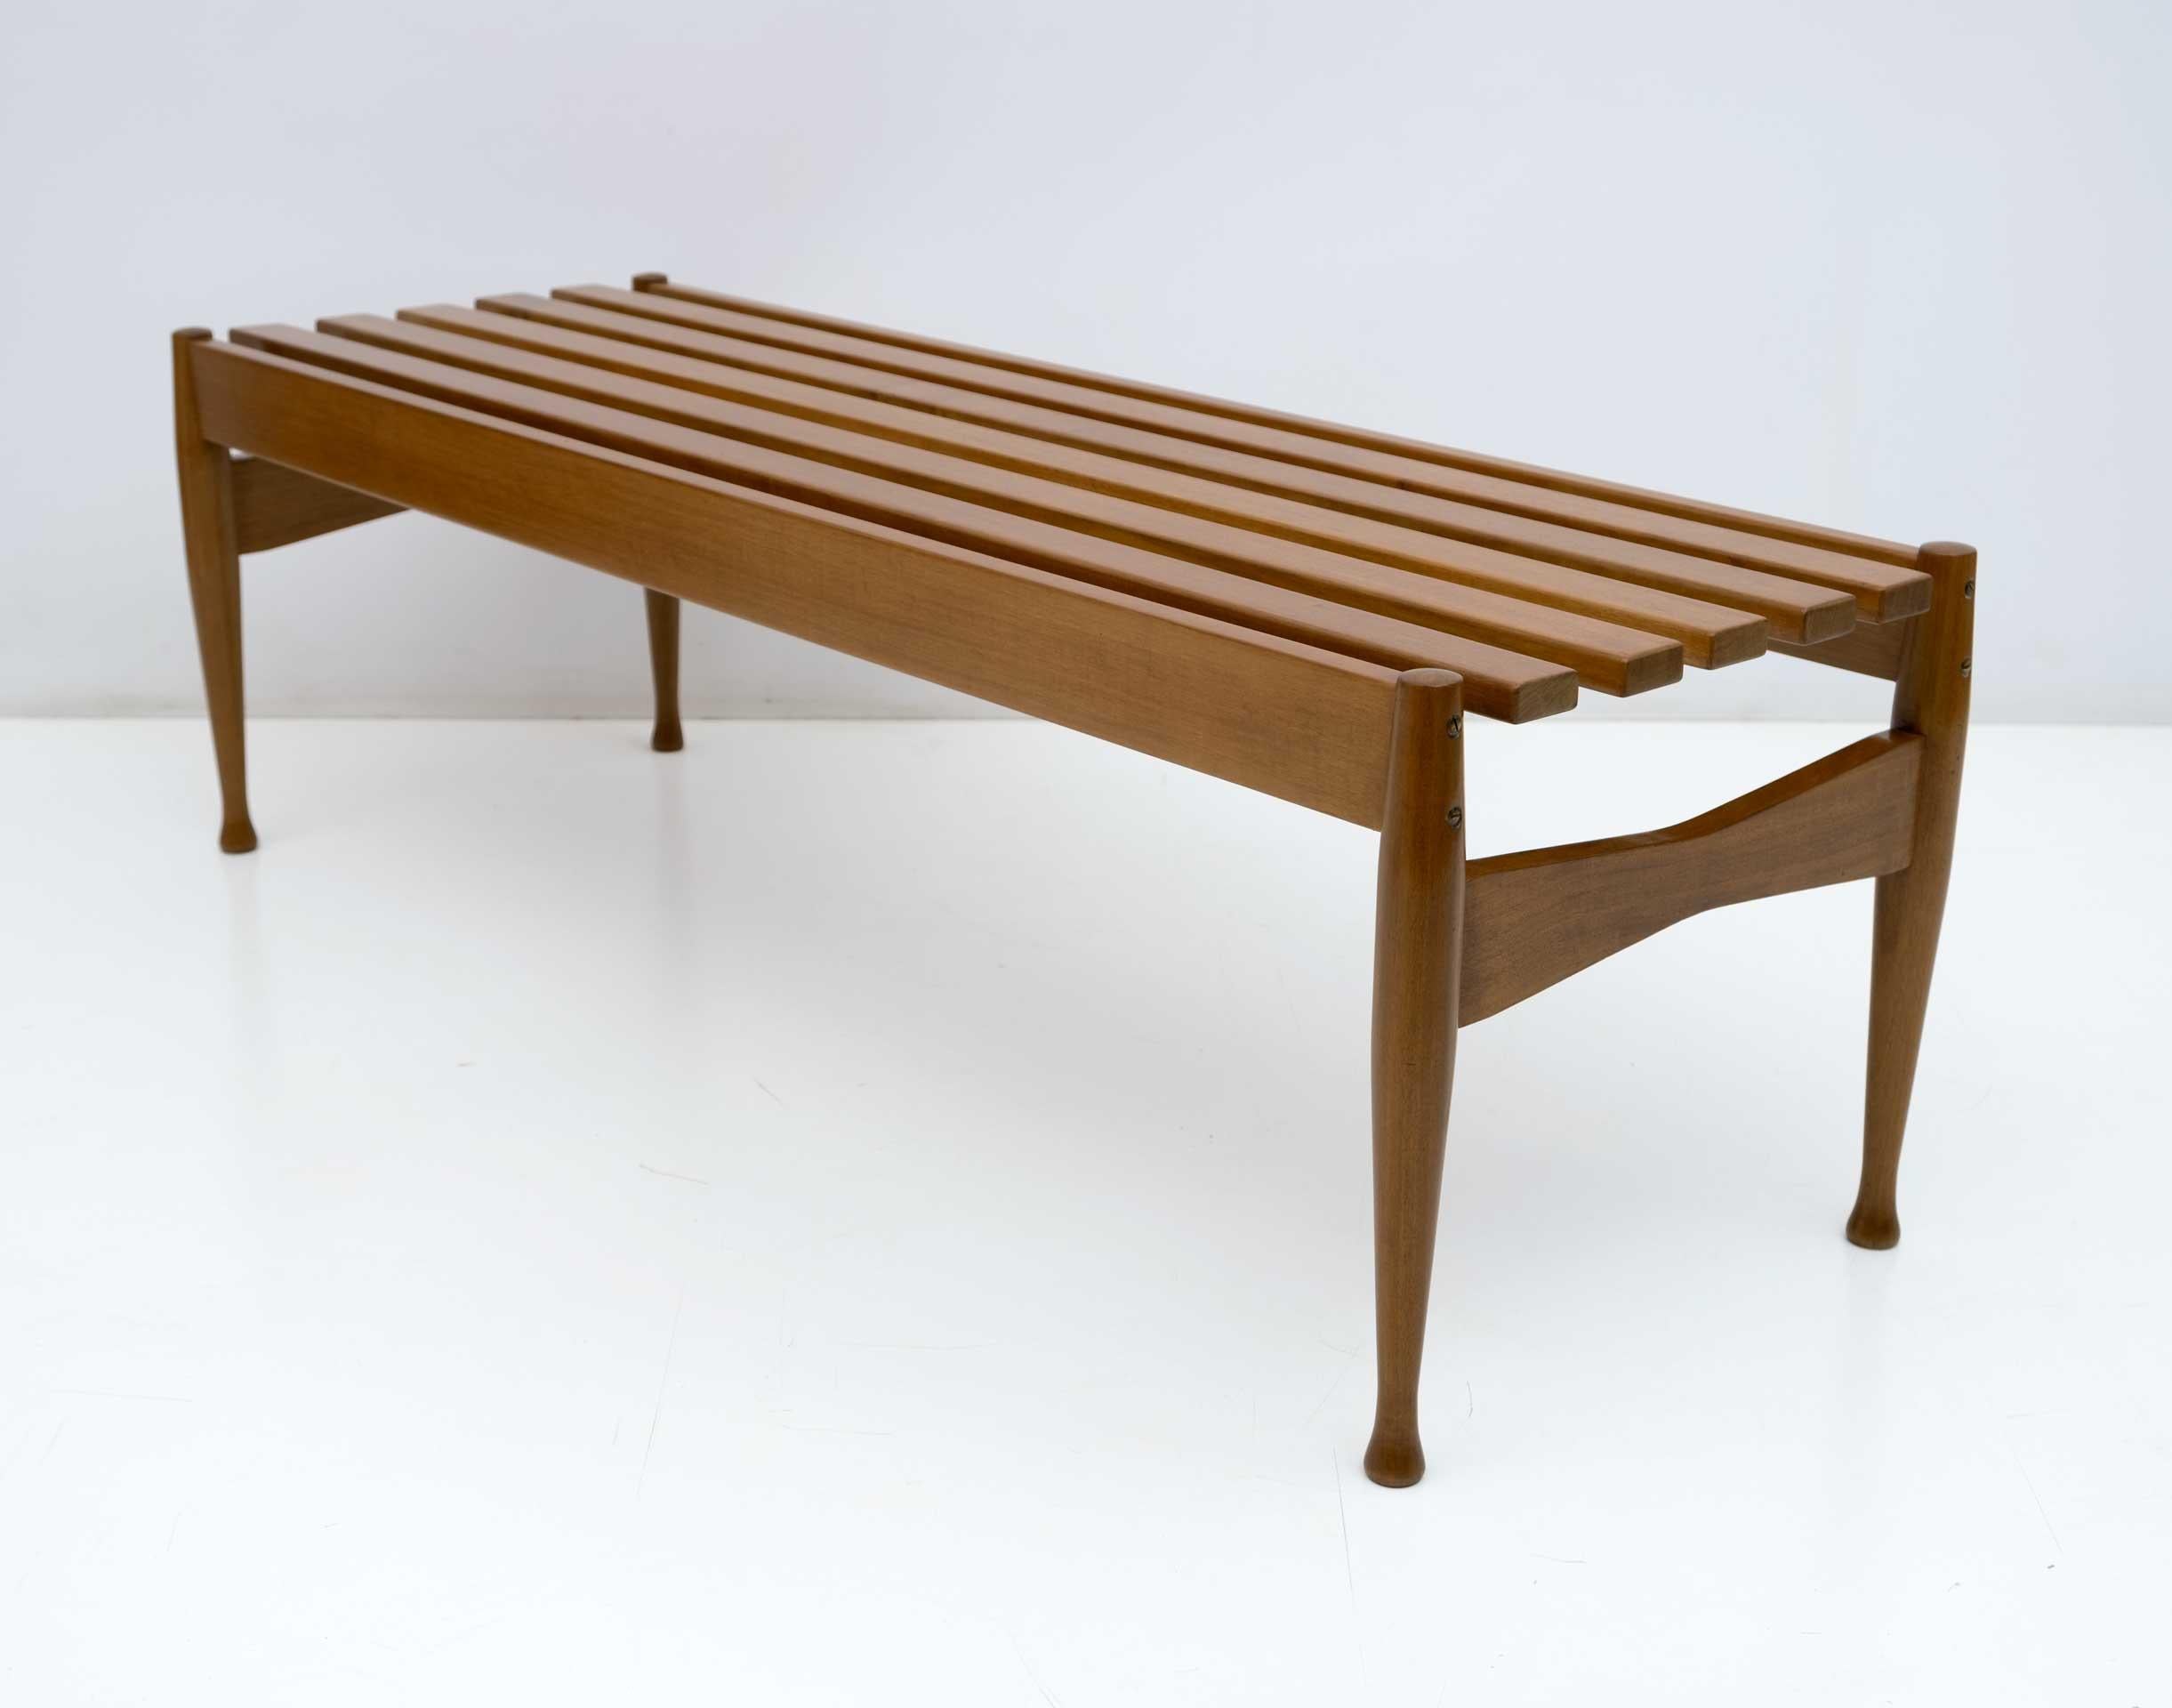 This bench was designed in the 1950s attributed Gio Ponti and produced by the historic Italian company Fratelli Reguitti.
The bench has been cleaned and polished with shellac, maintaining the original patina.